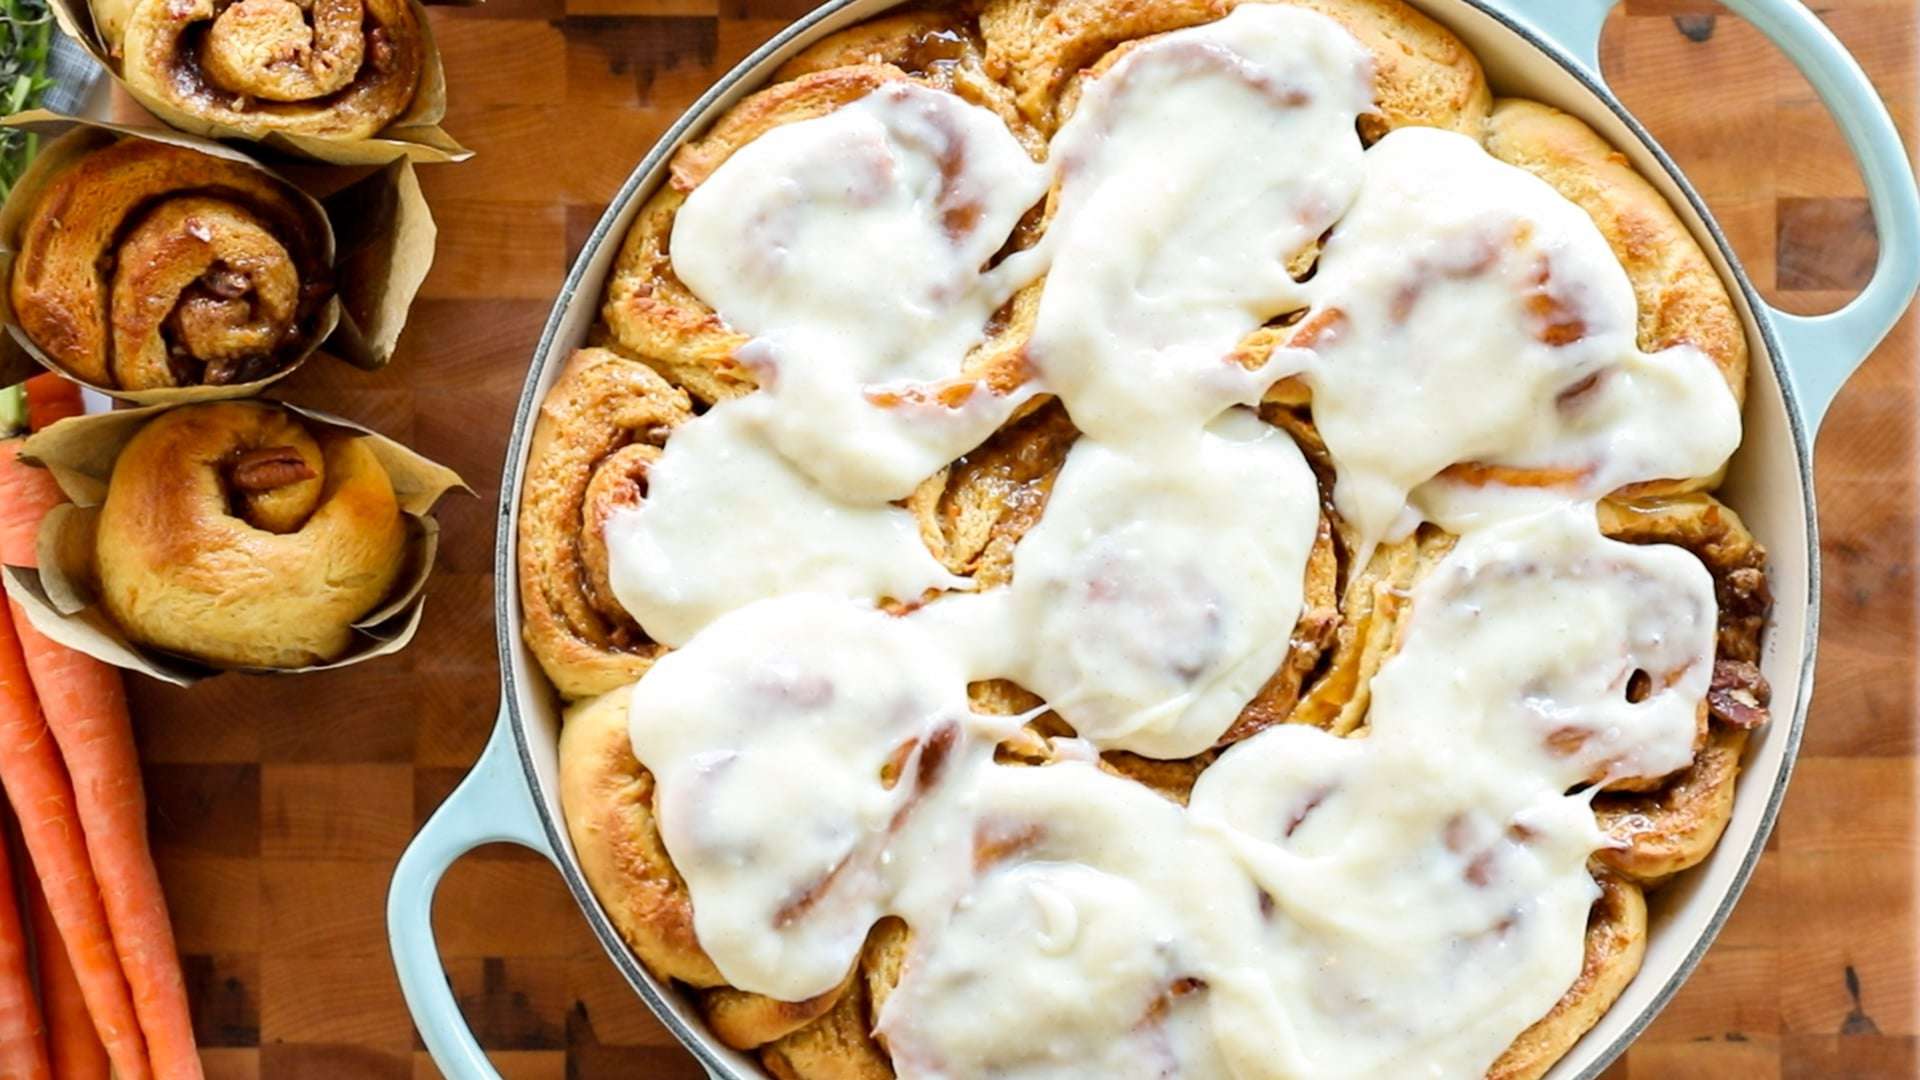 caramel pecan cinnamon rolls out of the oven, brushed with caramel and iced- ready to serve!